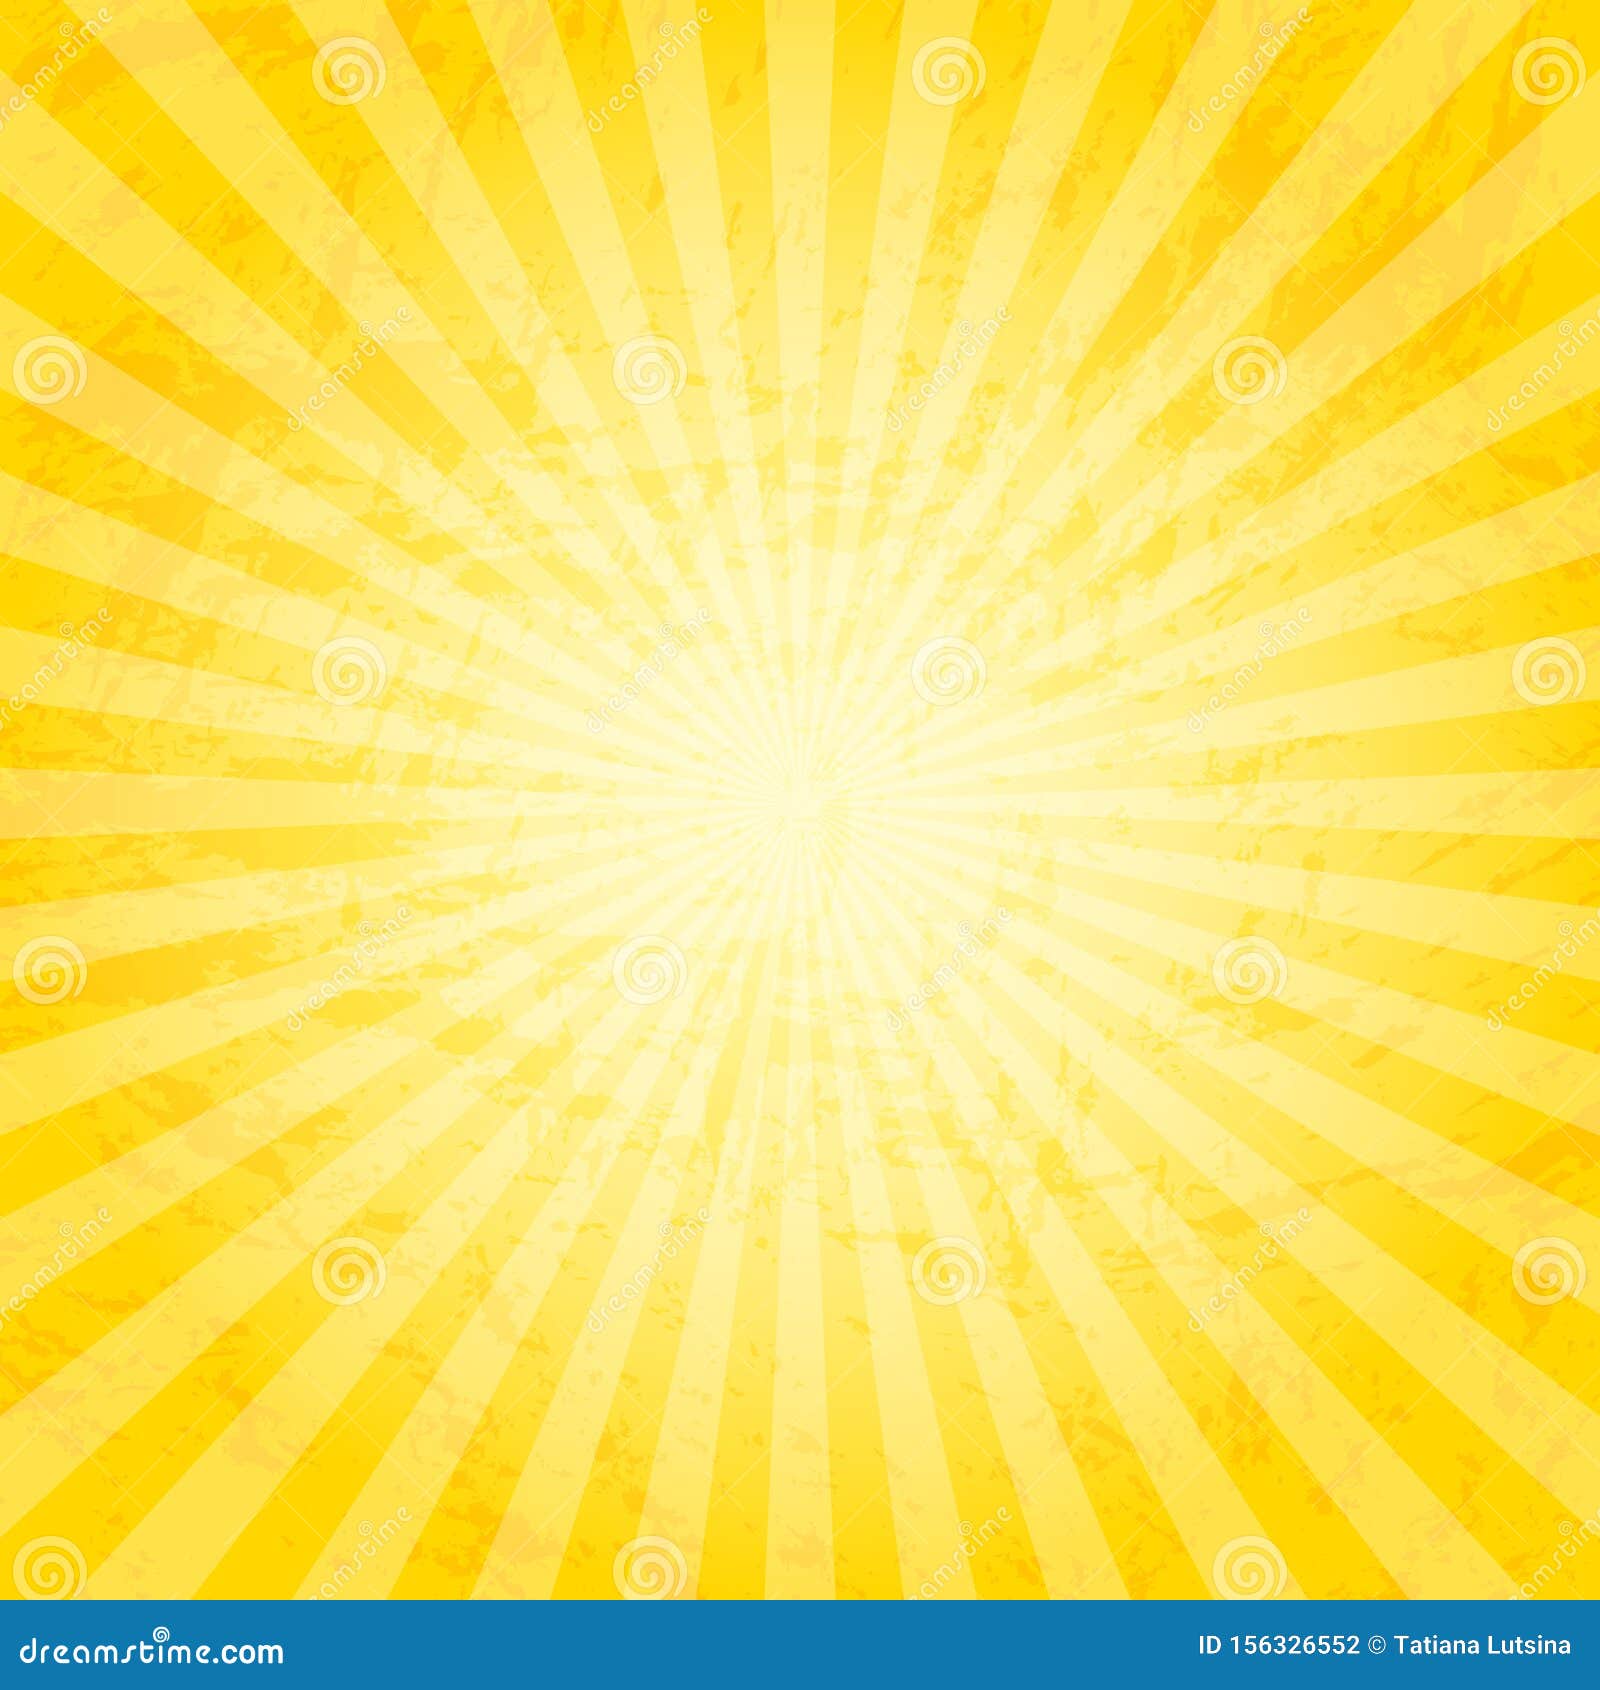 Backgrounds Ray Or Abstract Sun Rays Sun Sunburst Pattern Abstract Background Of The Shining Sun Rays Stock Illustration Illustration Of Energy Summer